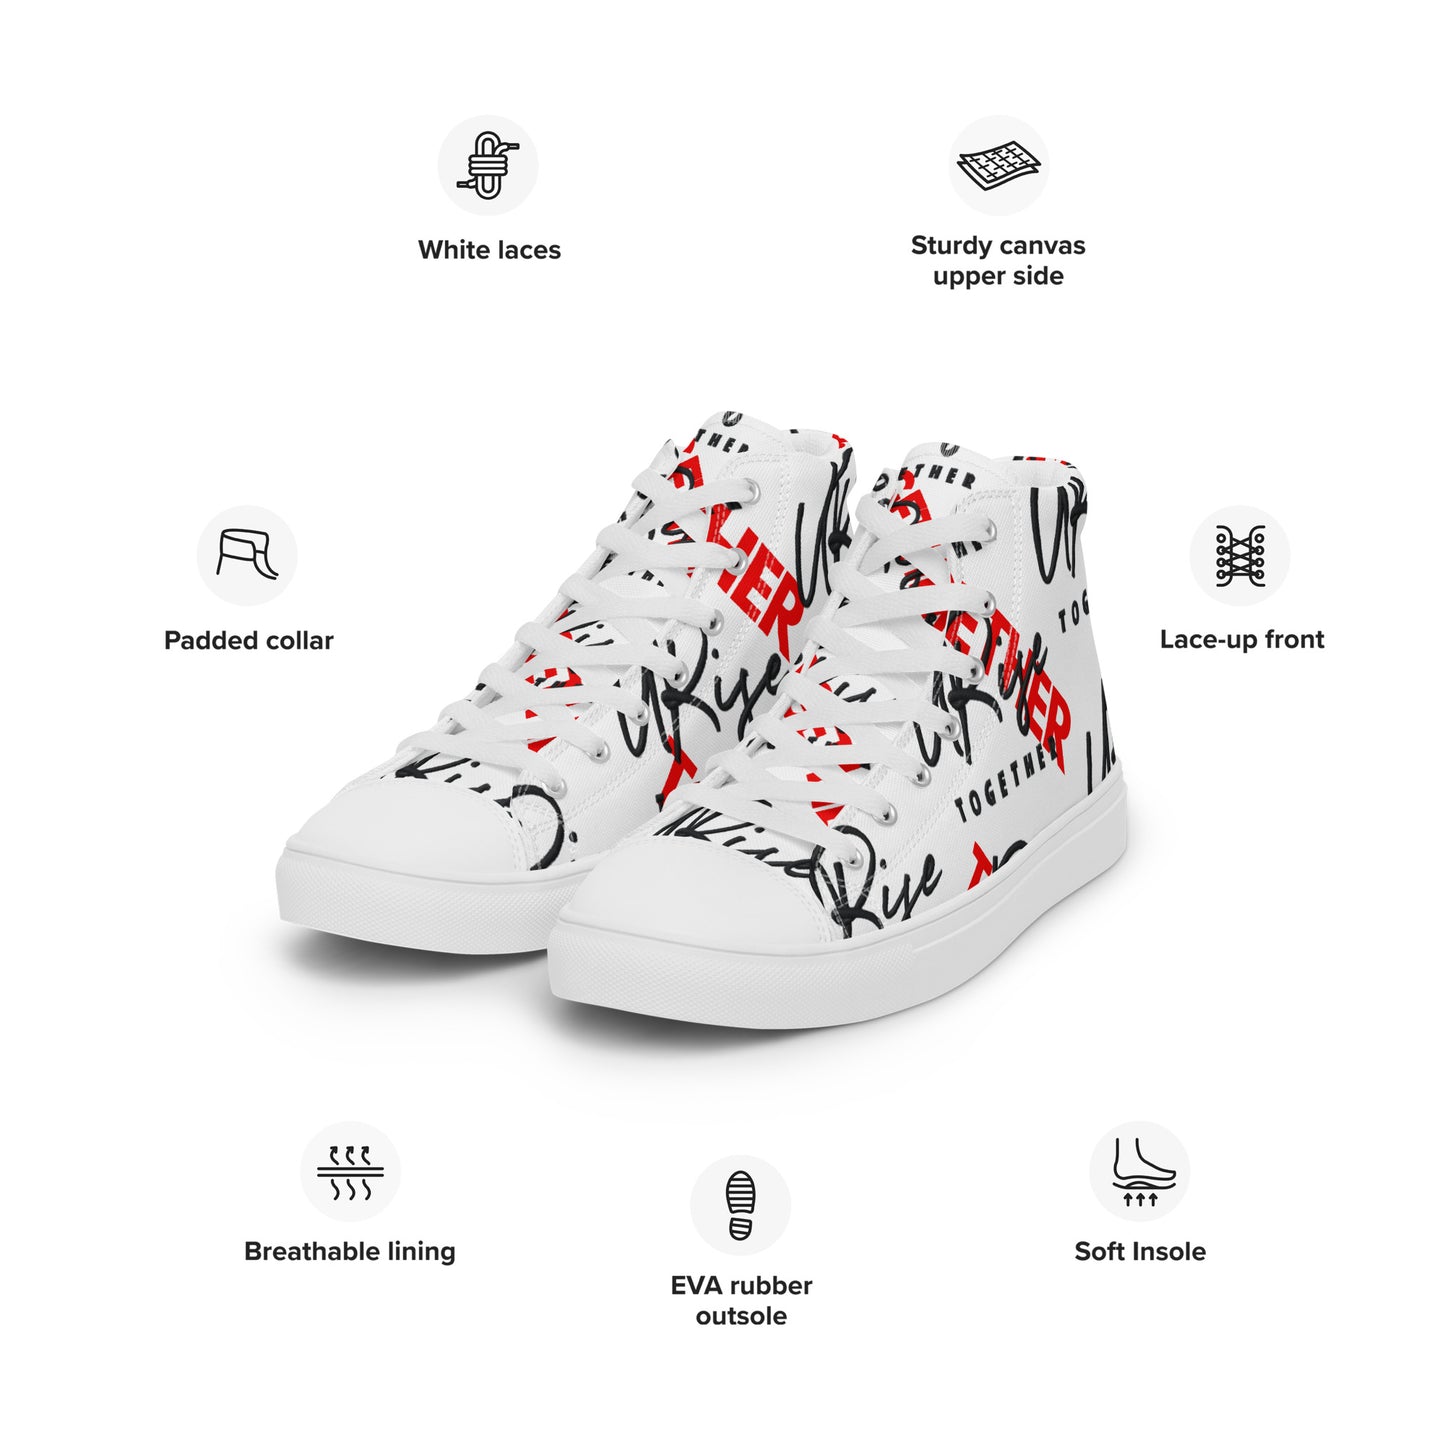 "URise Together" Men’s high top canvas shoes Wht/Red